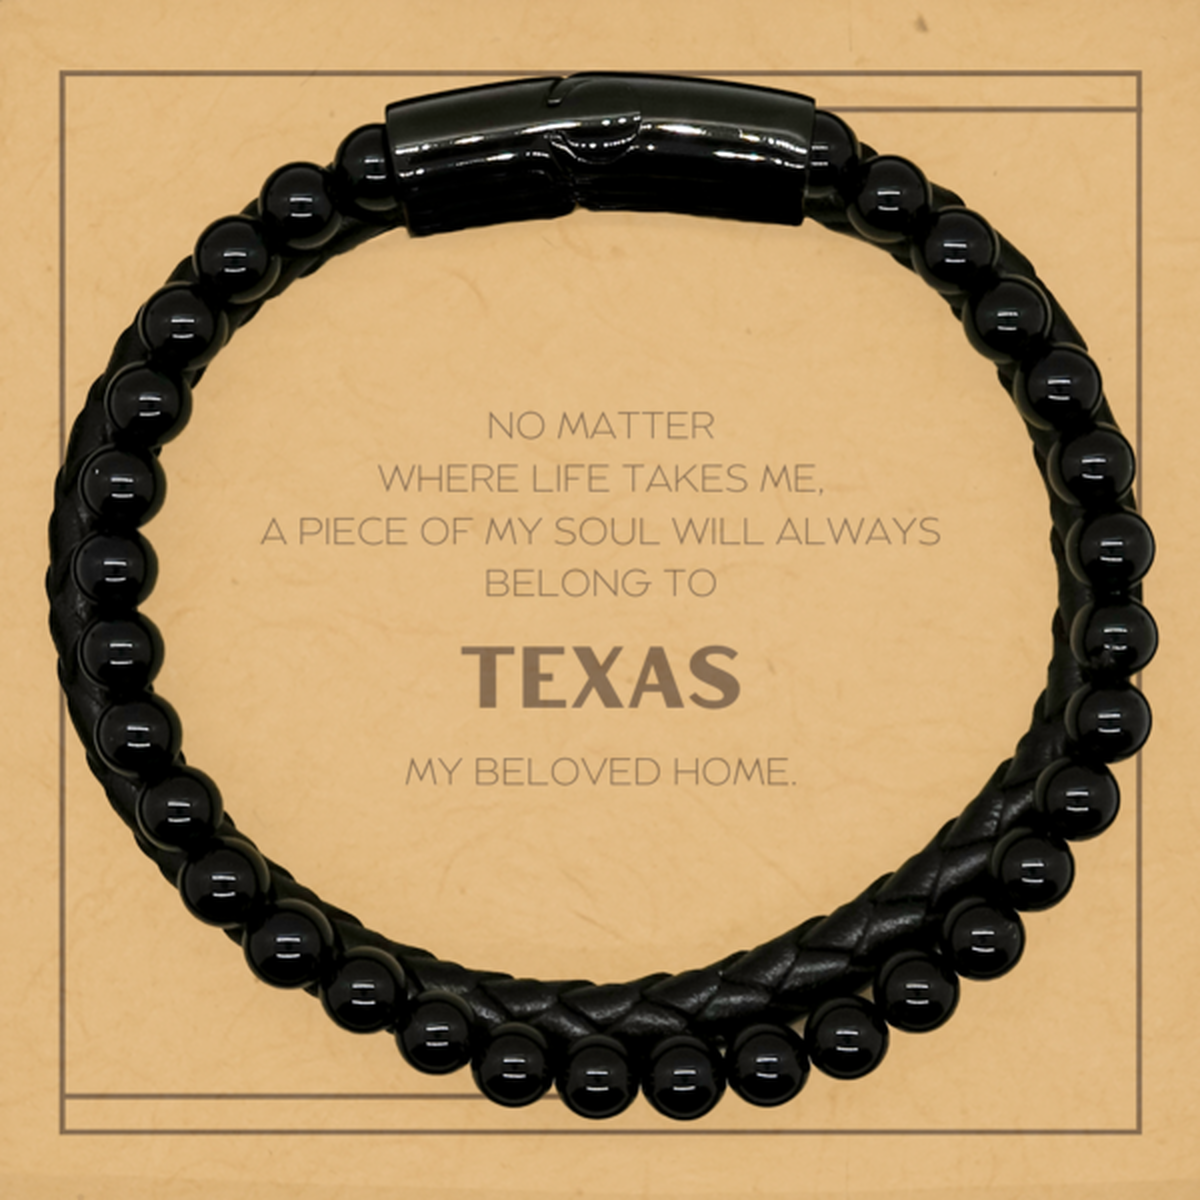 Love Texas State Gifts, My soul will always belong to Texas, Proud Stone Leather Bracelets, Birthday Unique Gifts For Texas Men, Women, Friends